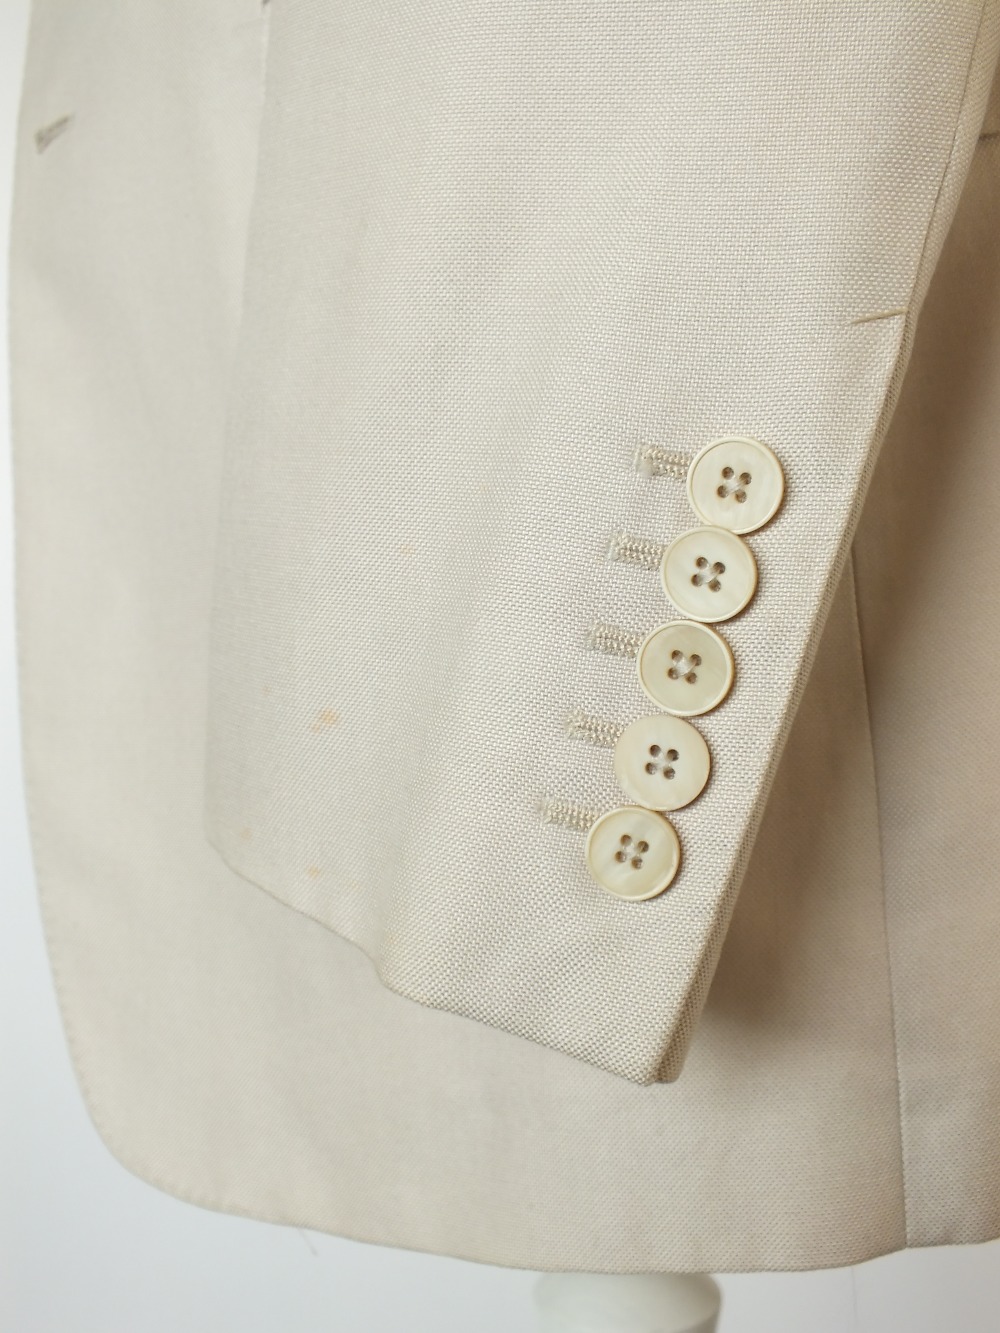 A Gucci suit, stone, double vent, Italian size 50R, 100% cotton, flat front , button fly, signs of - Image 5 of 6